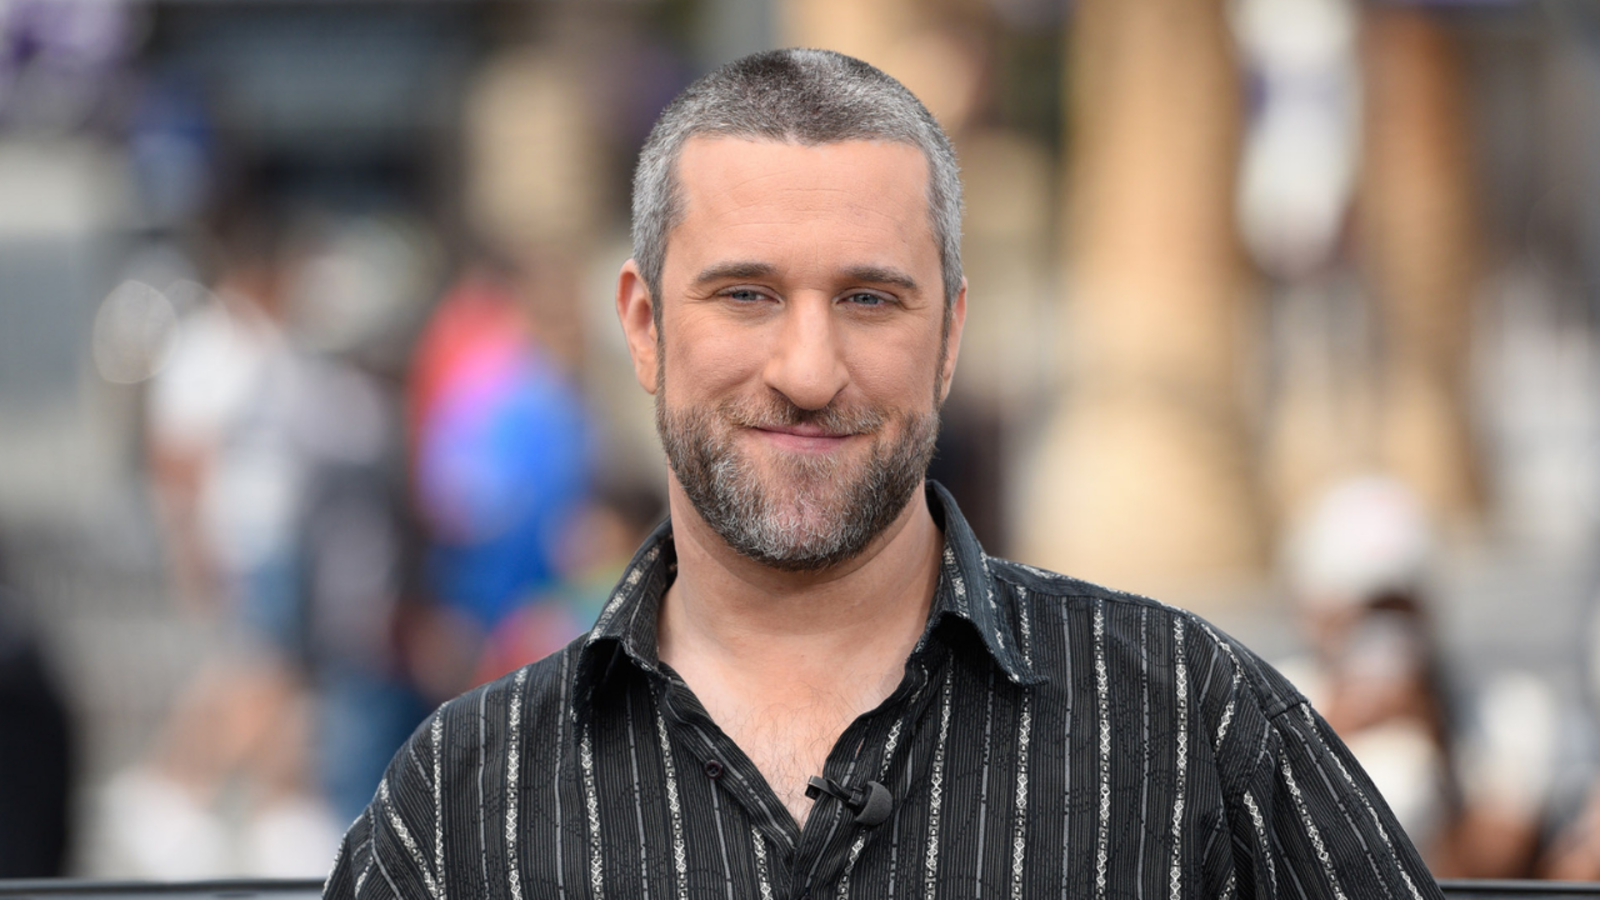 Dustin Diamond, the star of "Bill Saved Him," is hospitalized with cancer